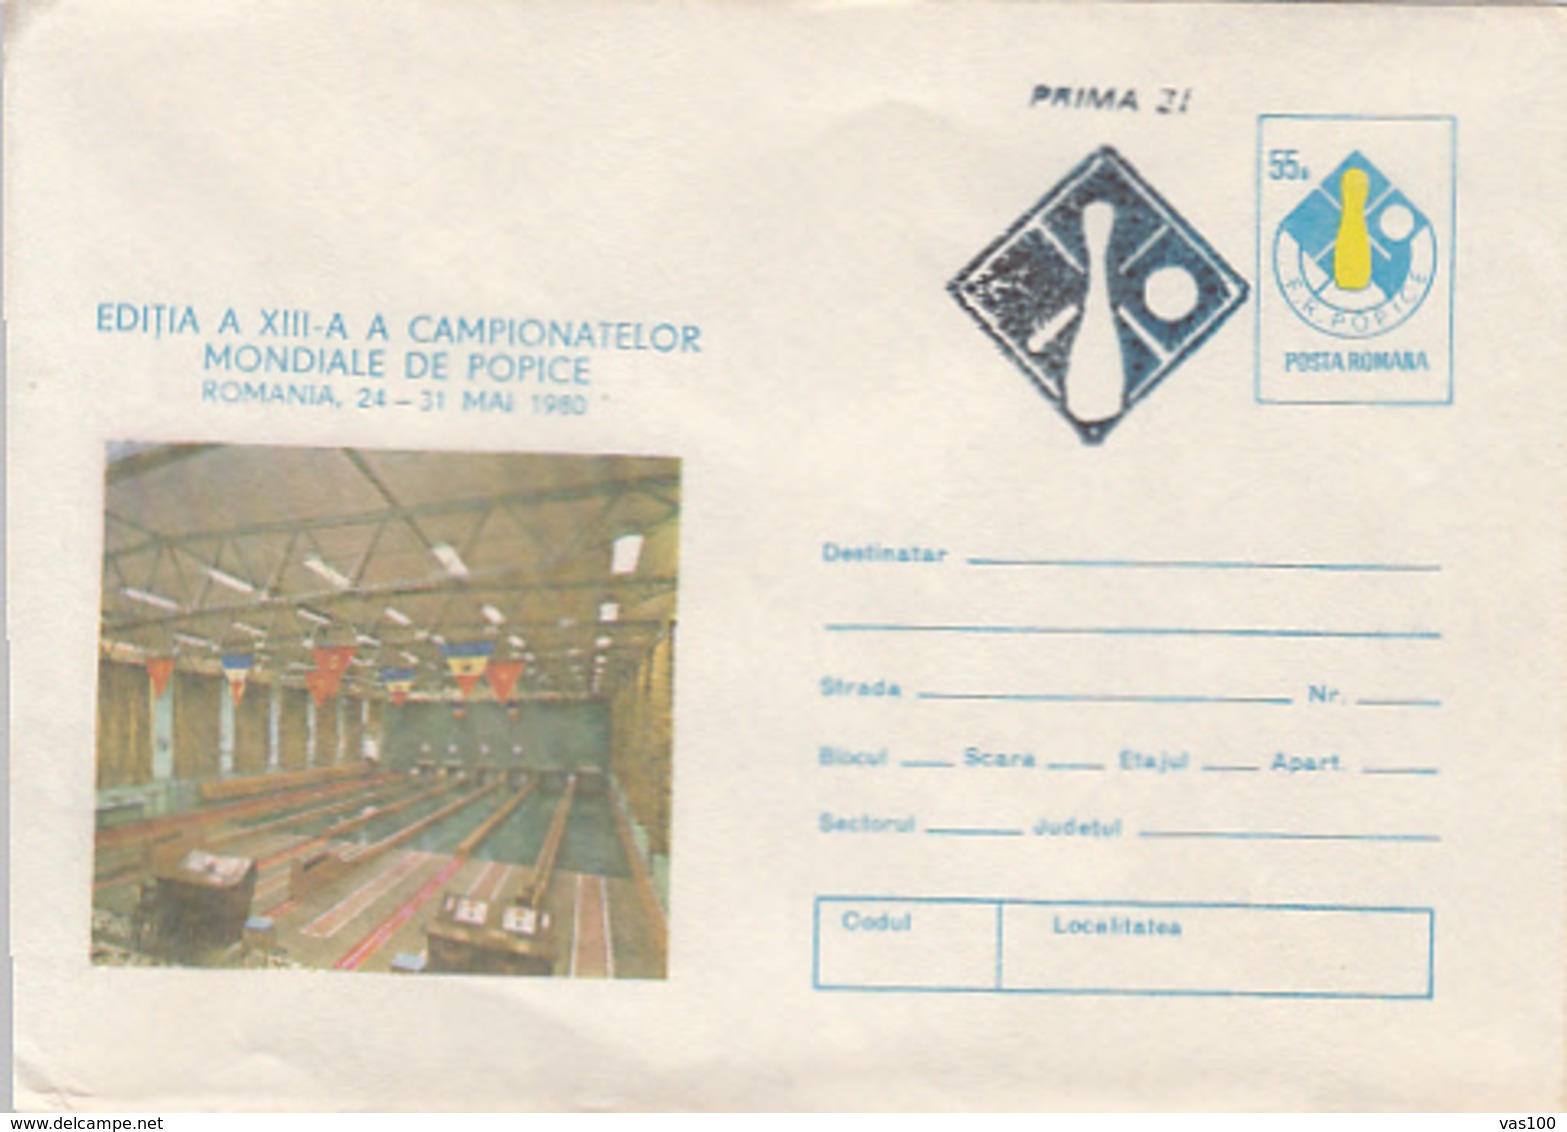 SPORTS, BOWLS, WORLD BOWLING CHAMPIONSHIPS, COVER STATIONERY, ENTIER POSTAL, 1980, ROMANIA - Petanque